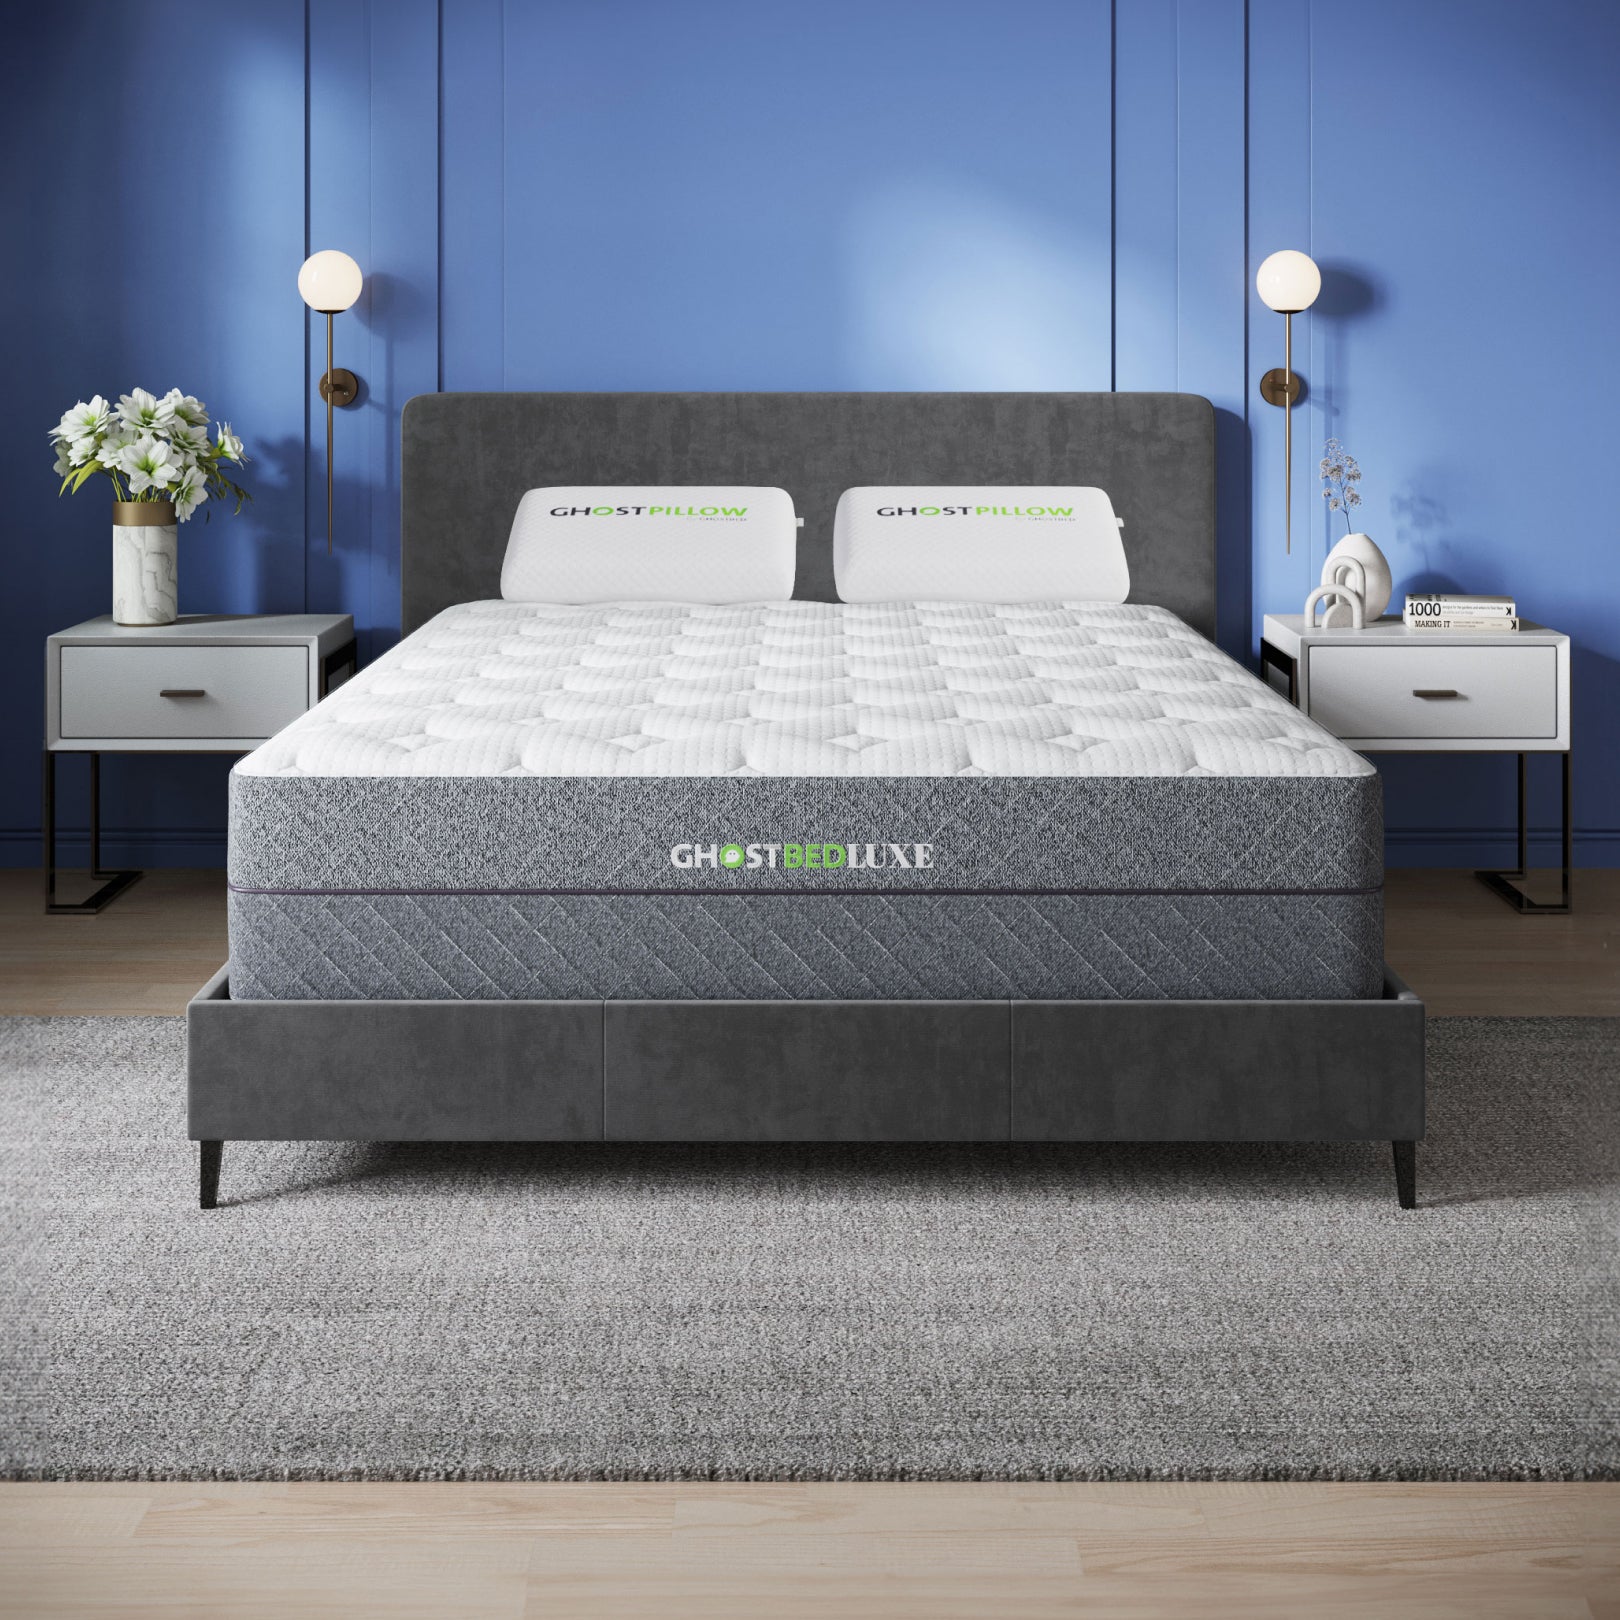 Best Mattress For Side Sleepers With Hip Pain (Top 6 Beds!) 